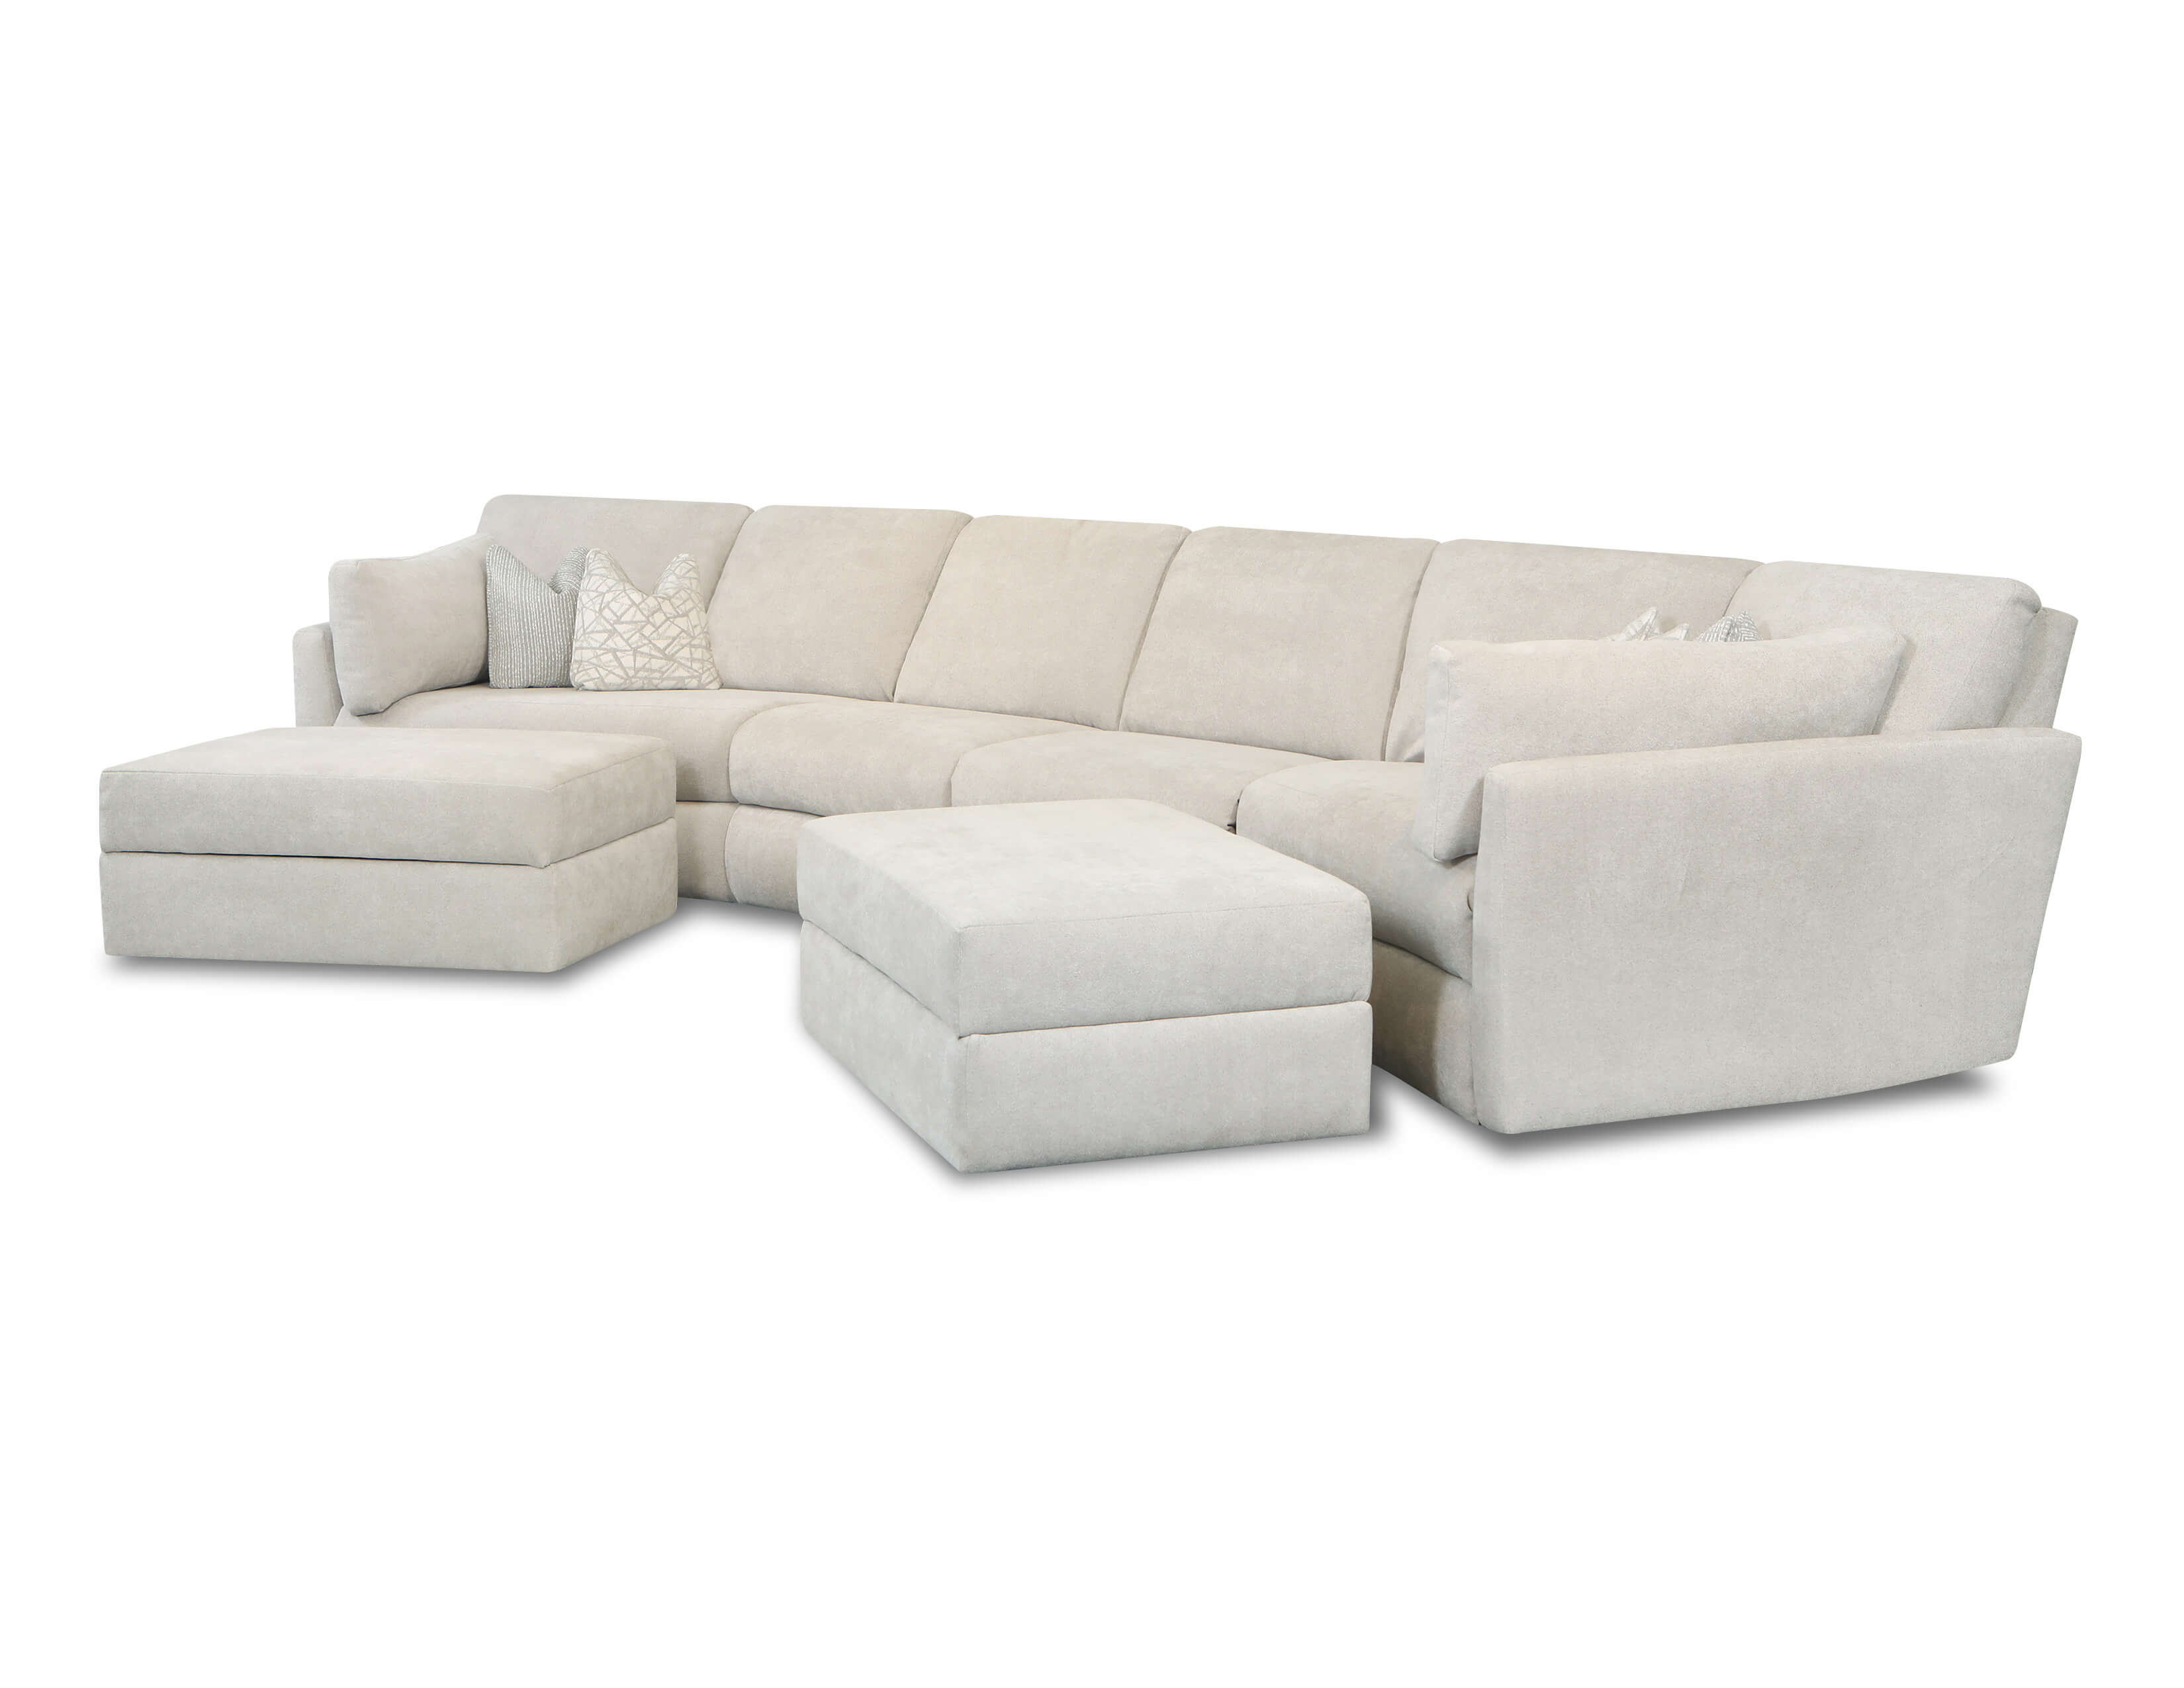 235 Next Gen Sectional Image